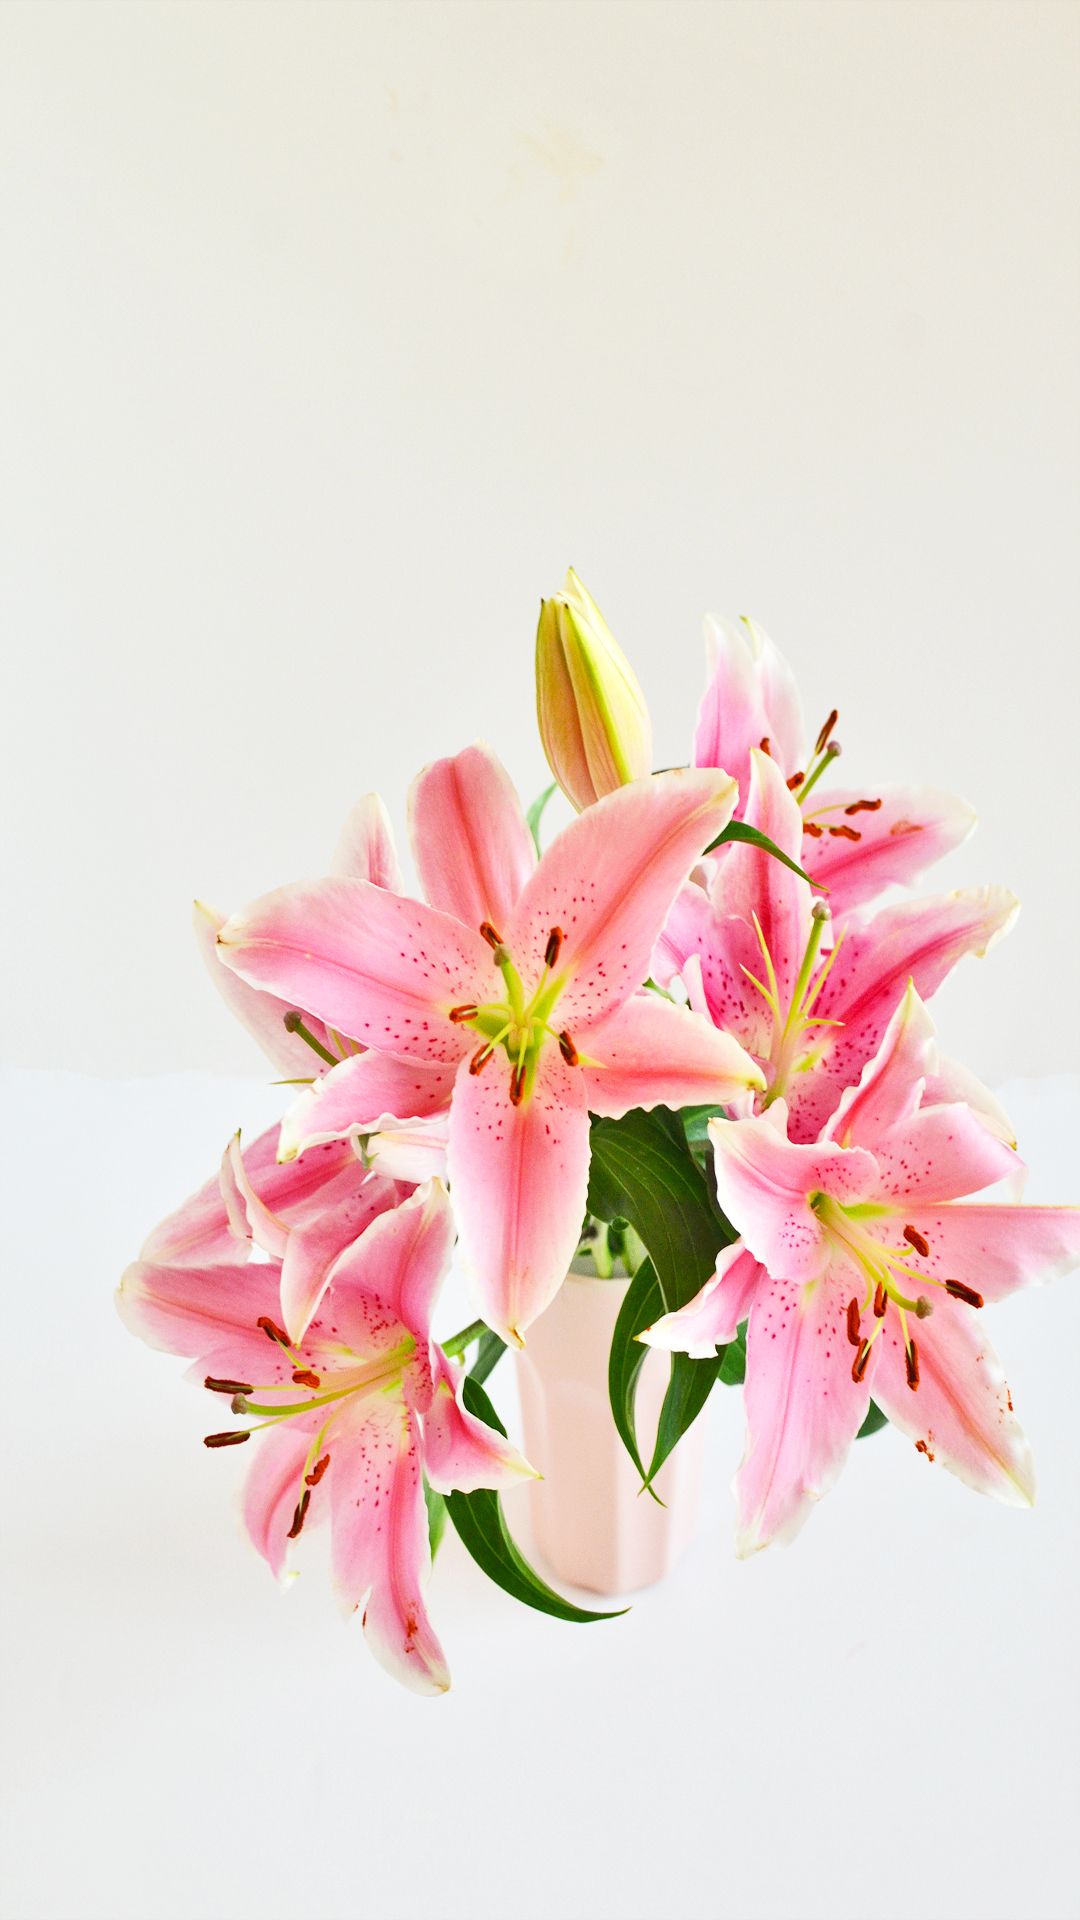 Lilies Iphone Wallpapers